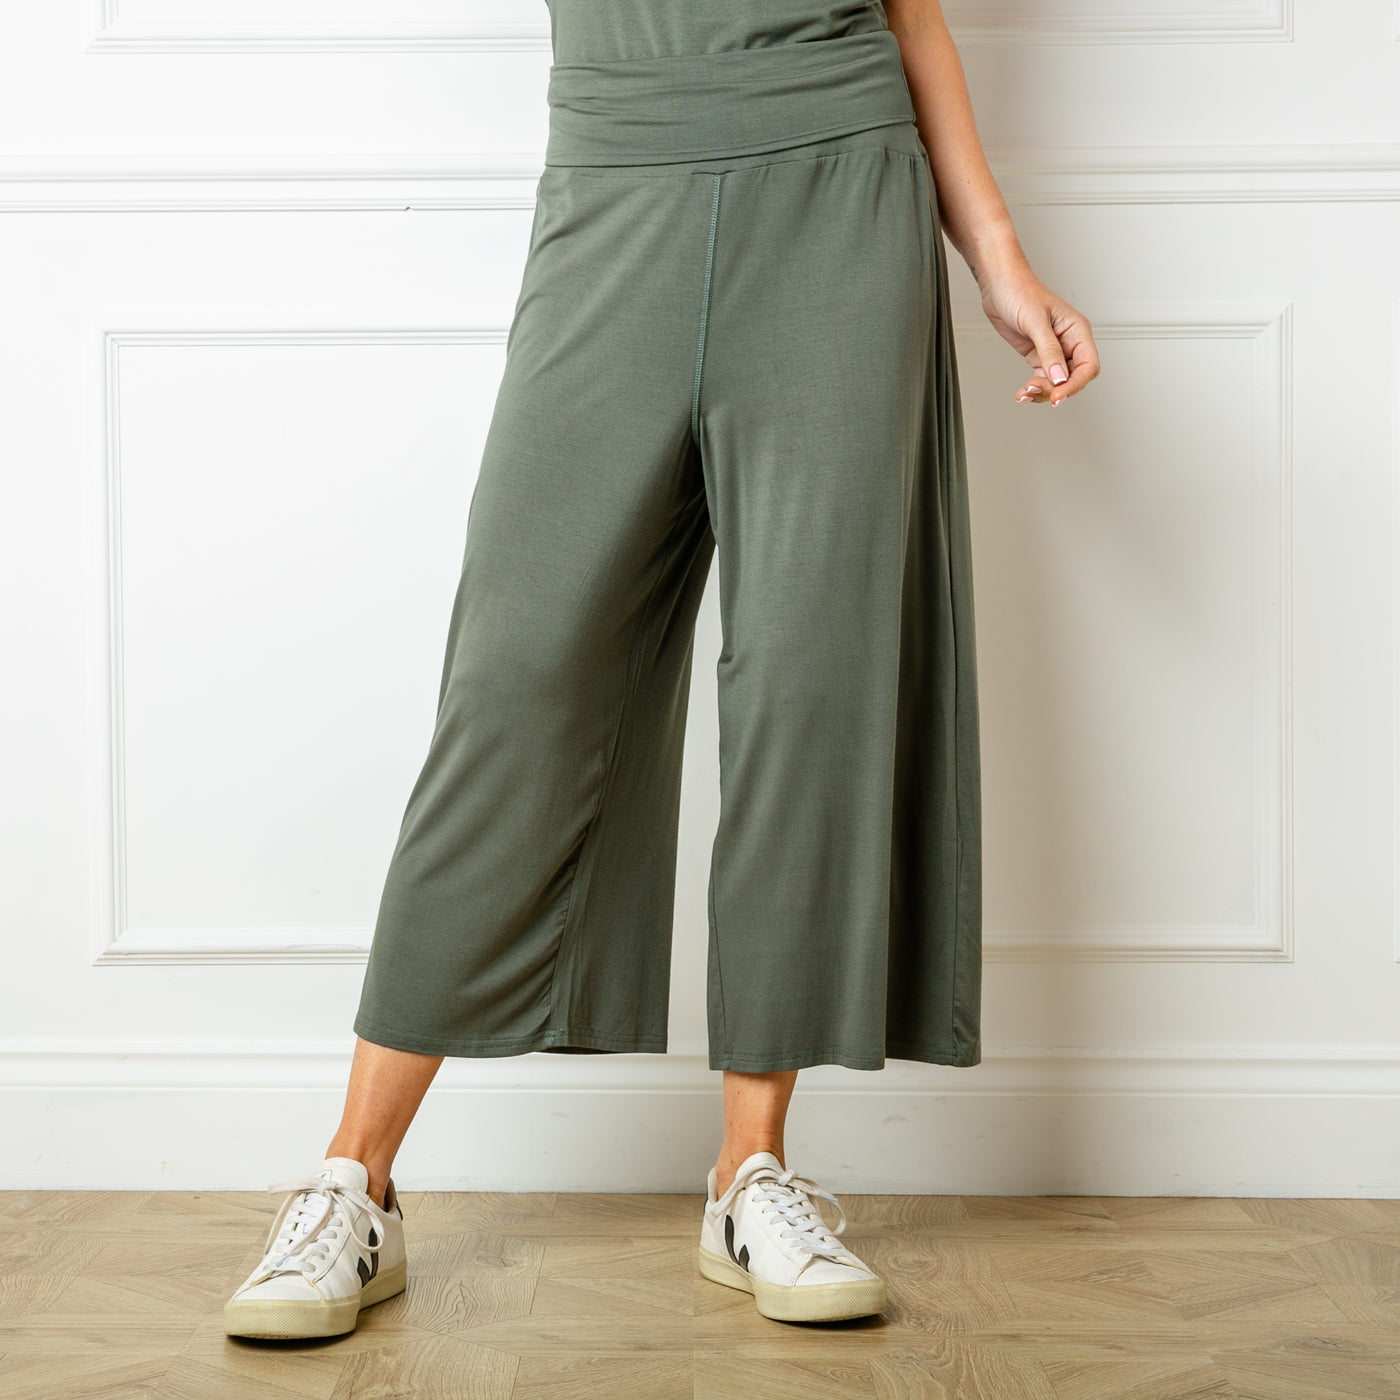 The khaki green Bamboo Fold Over Pants with a wide leg silhouette in a soft and stretchy material